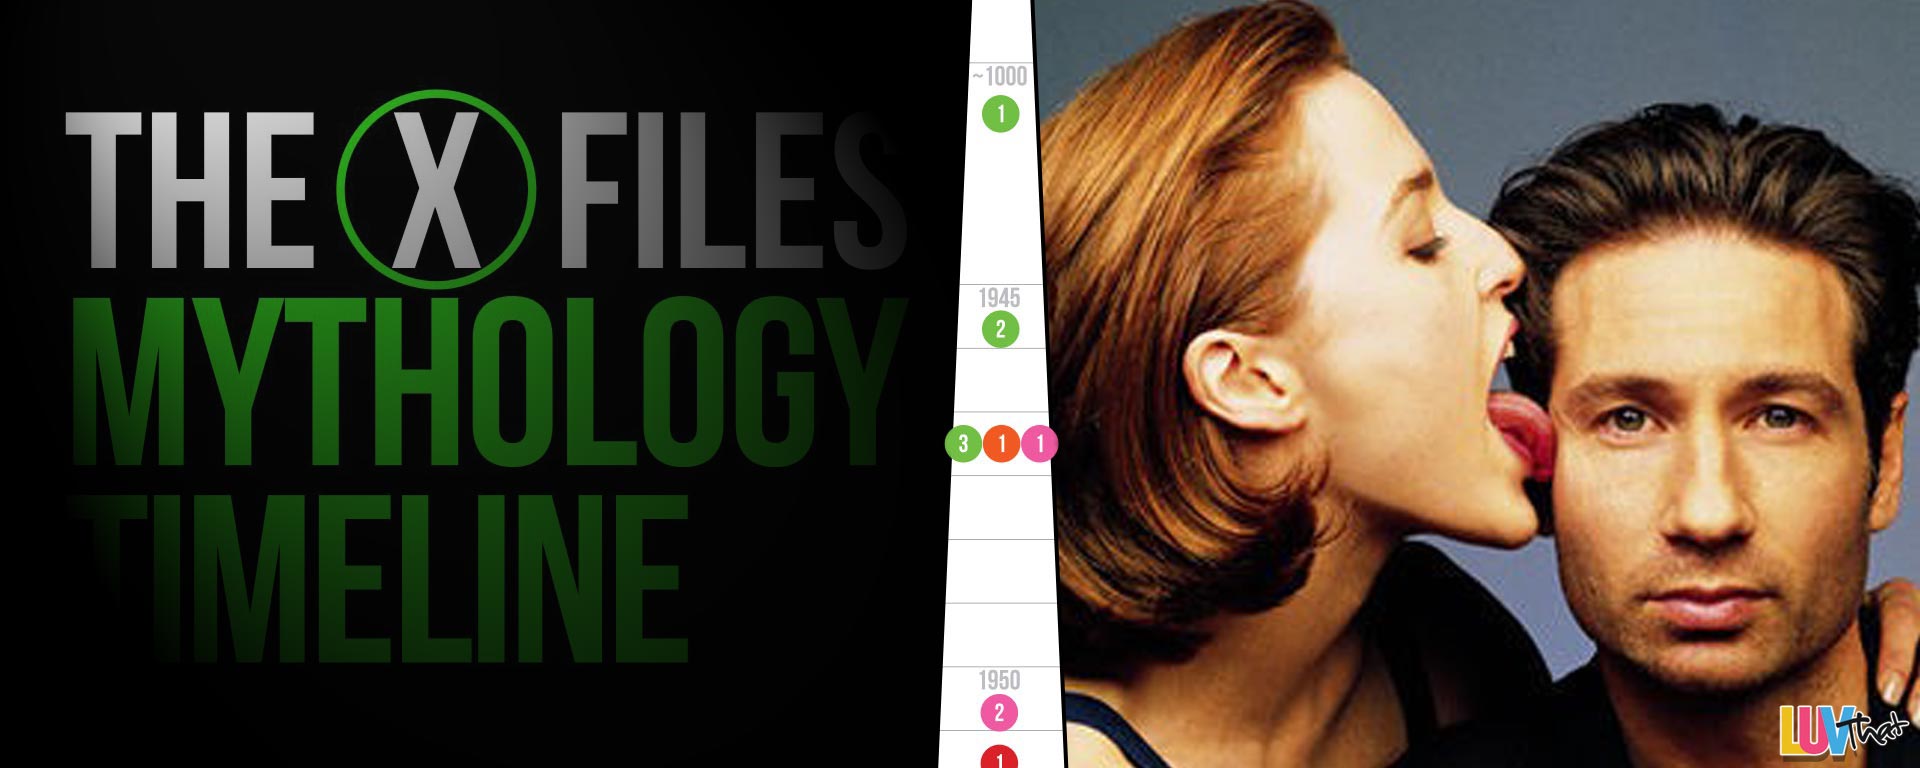 X-FILES Complete Show Timeline gillian anderson david duchovny